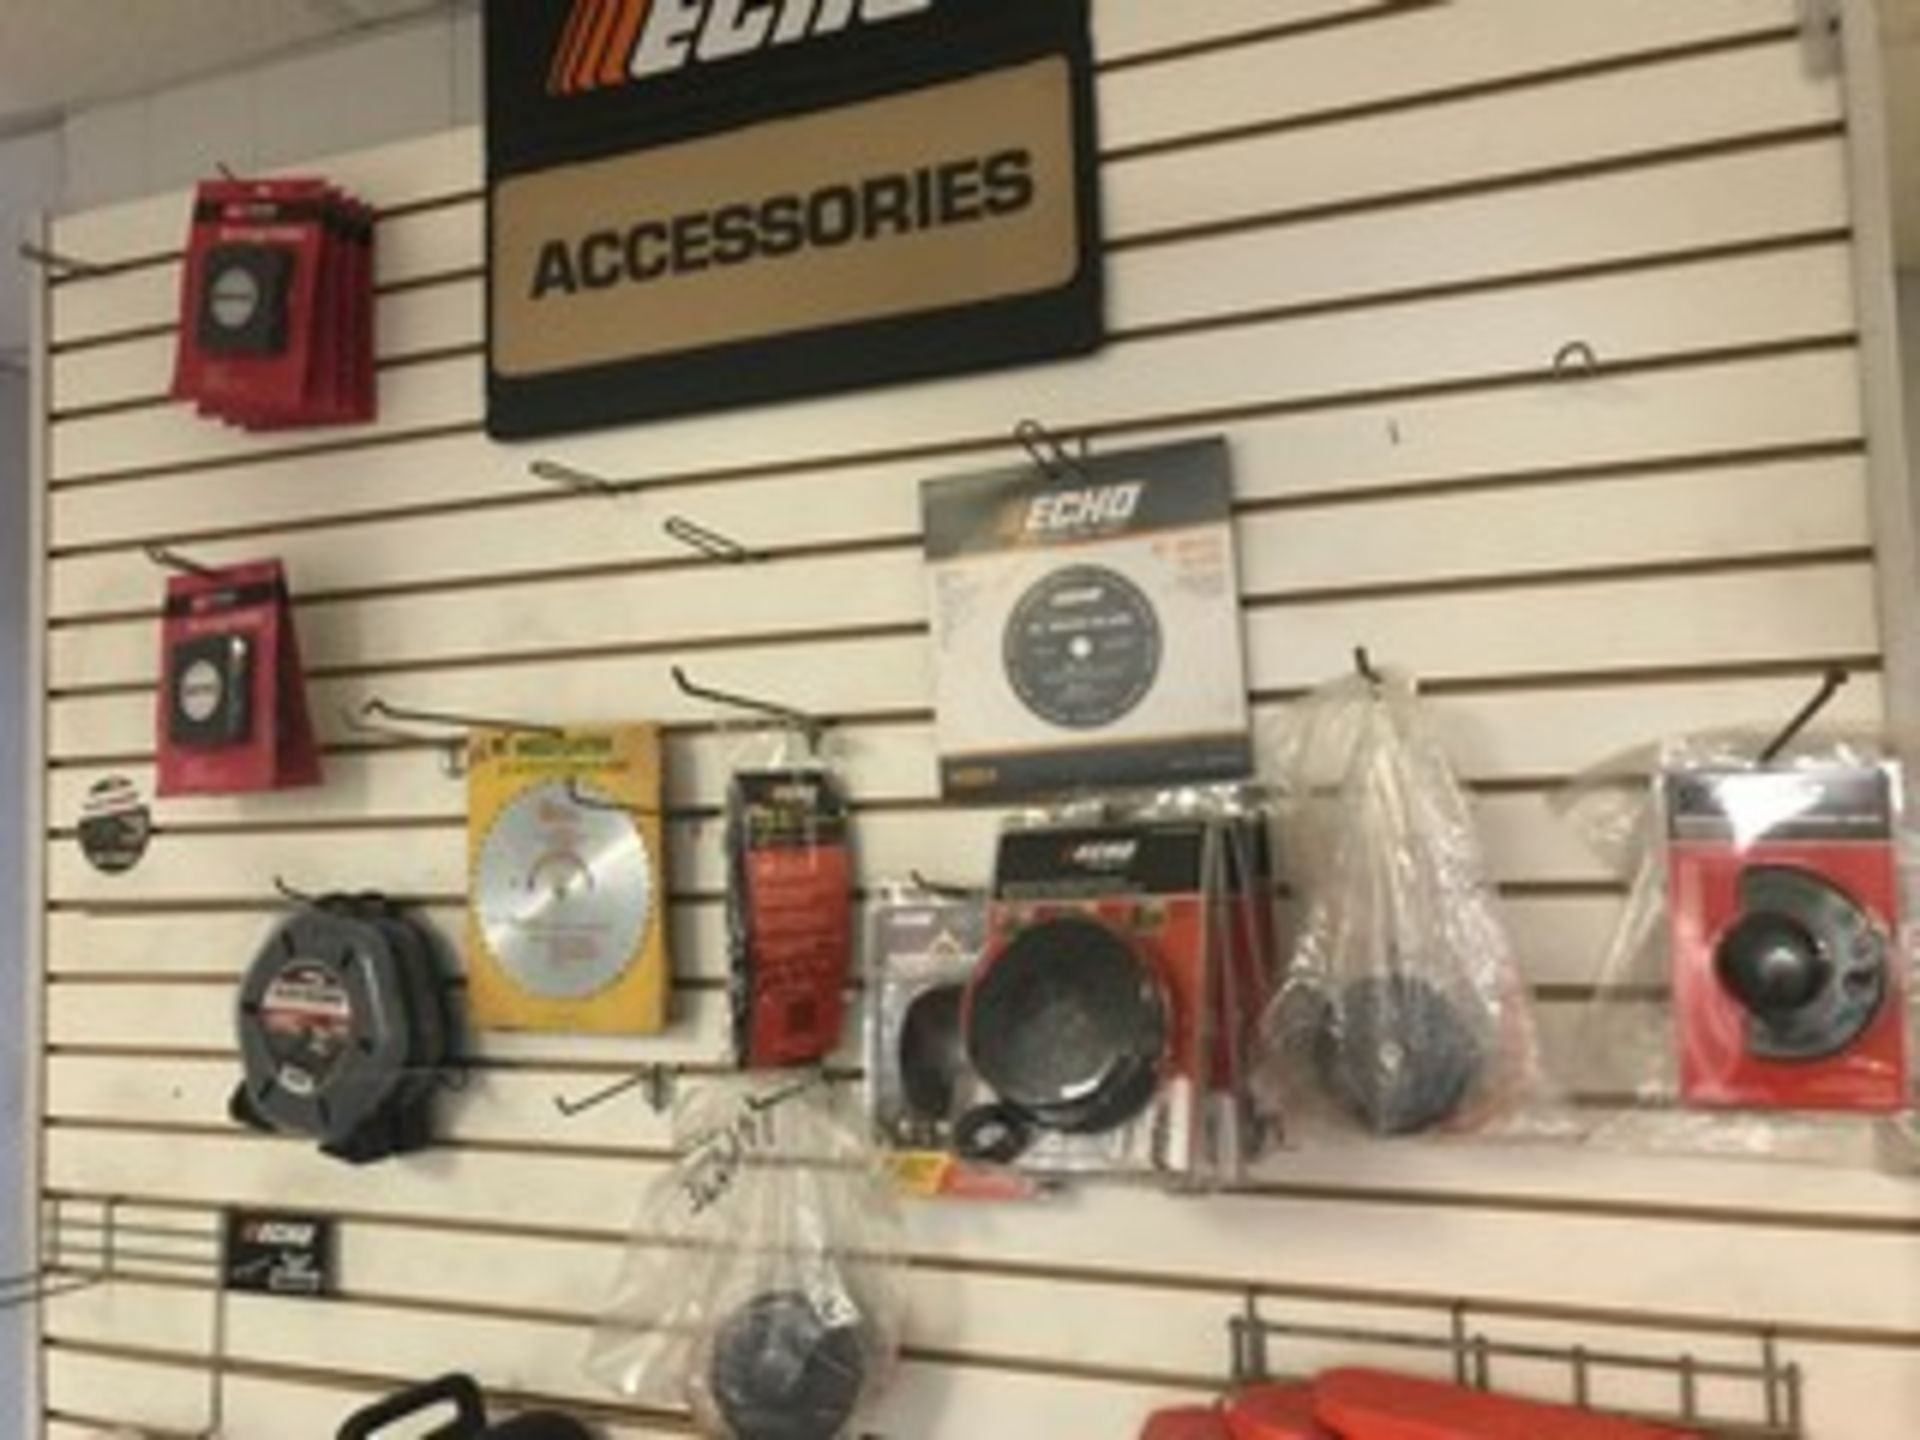 ASSORTED ECHO ACCESSORIES - GLOVES, TRIMMER HEADS, BLADES, LINES, ETC (CHAIN SAW NOT INCLUDED)